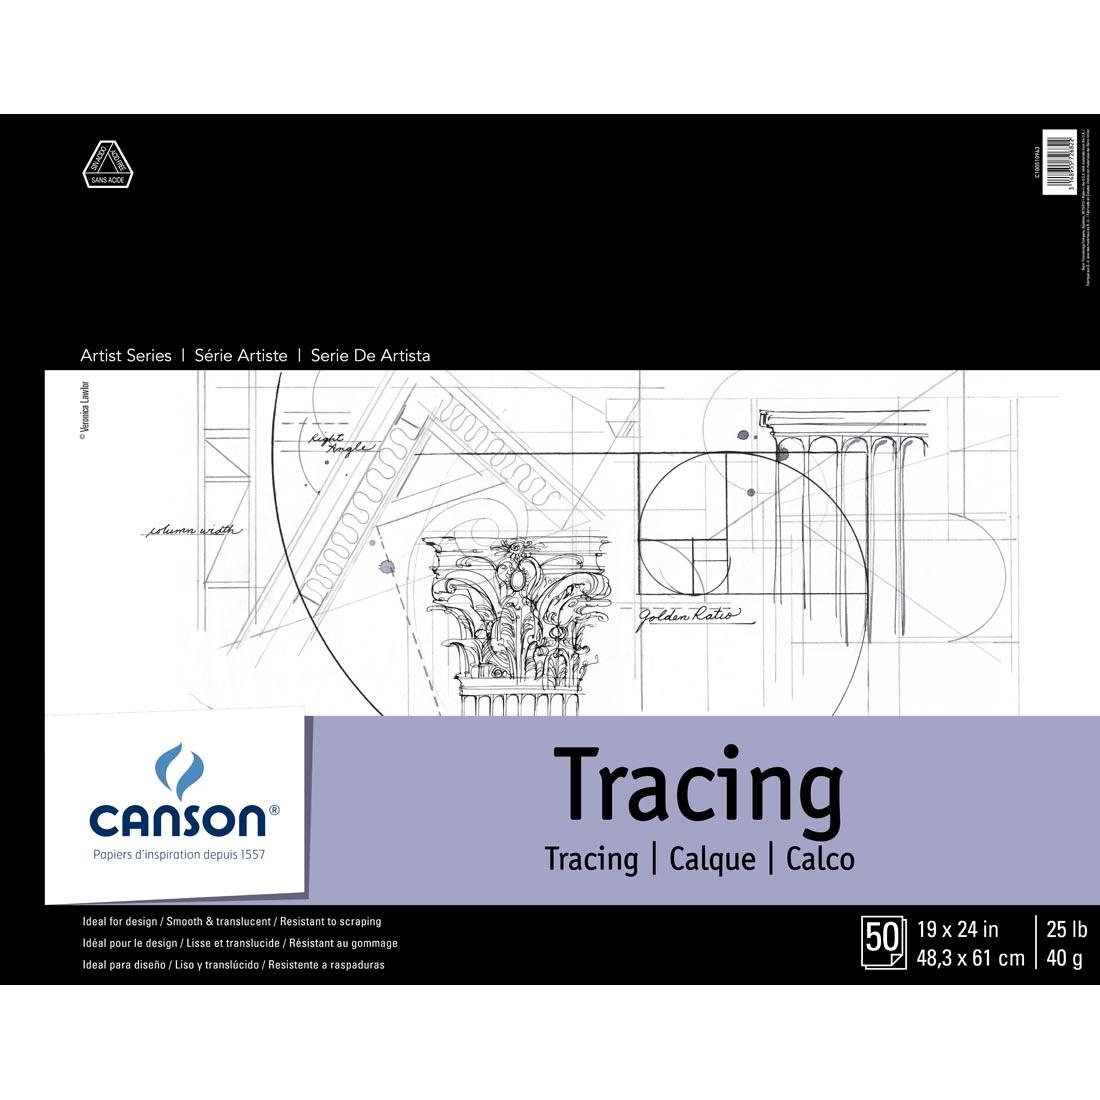 Canson Artist Series Tracing Paper Pad